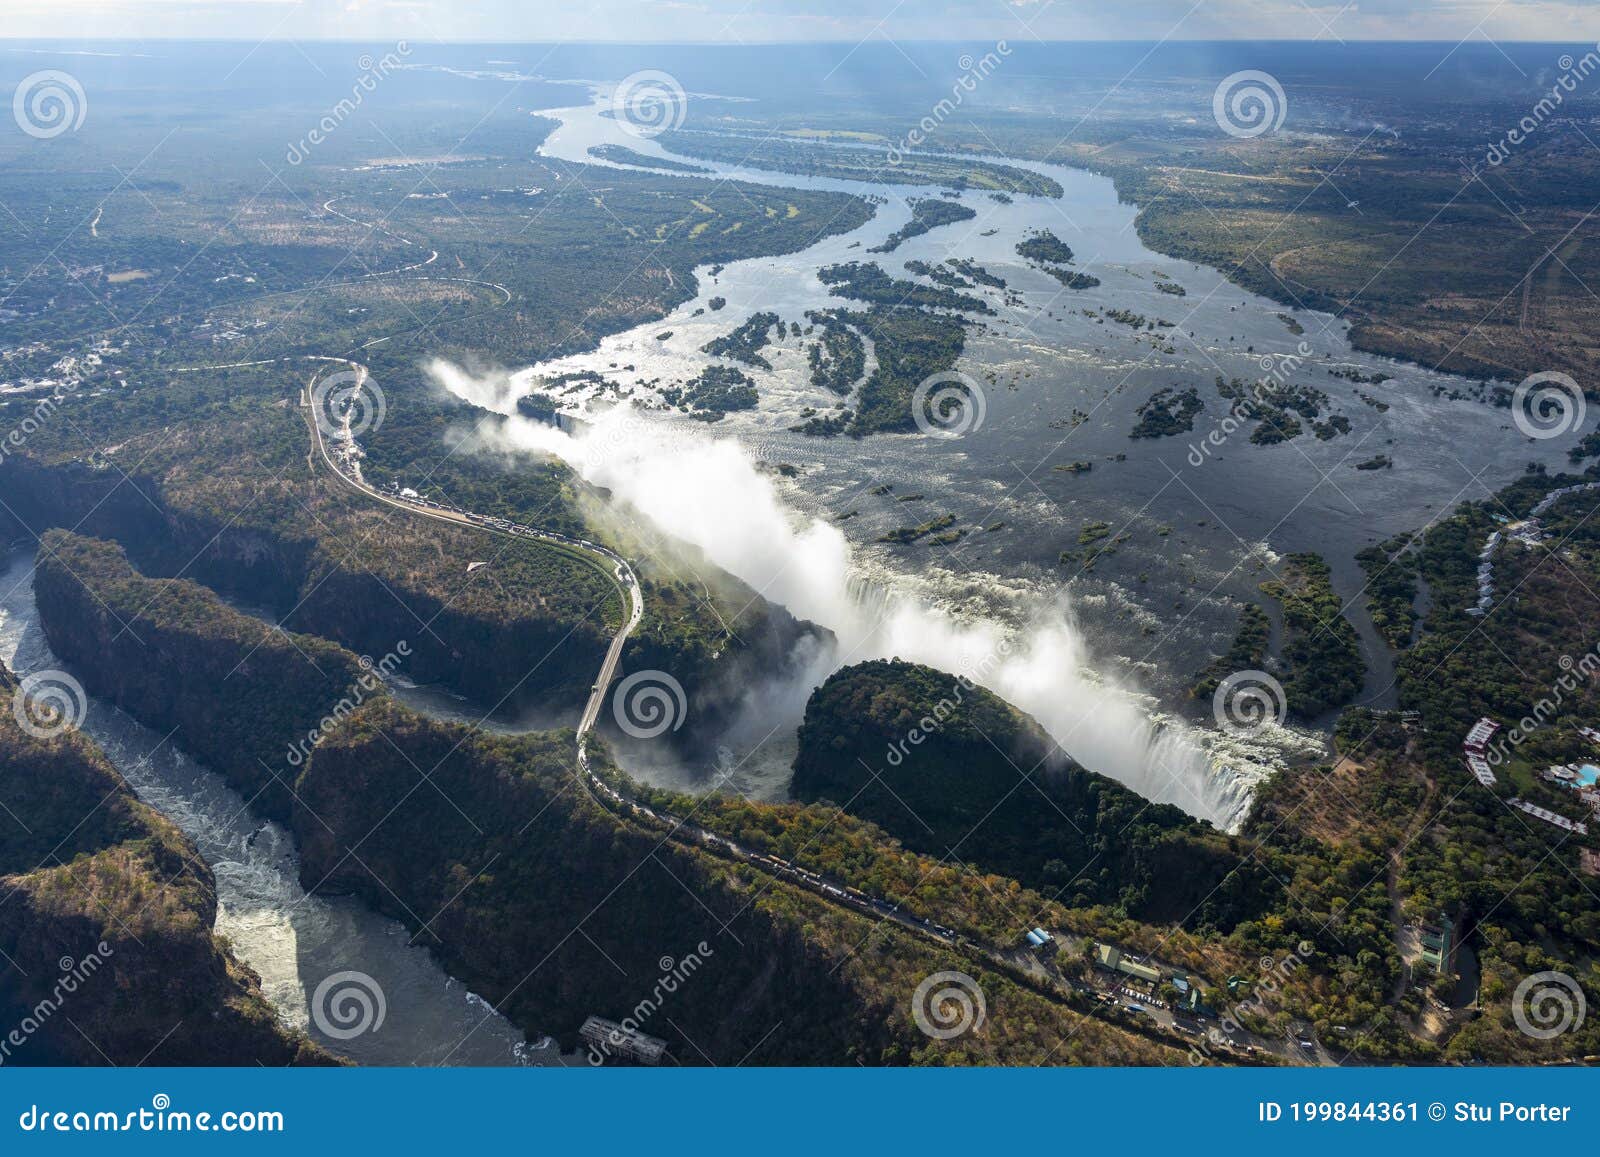 areal view of victoria falls in zimbabwe